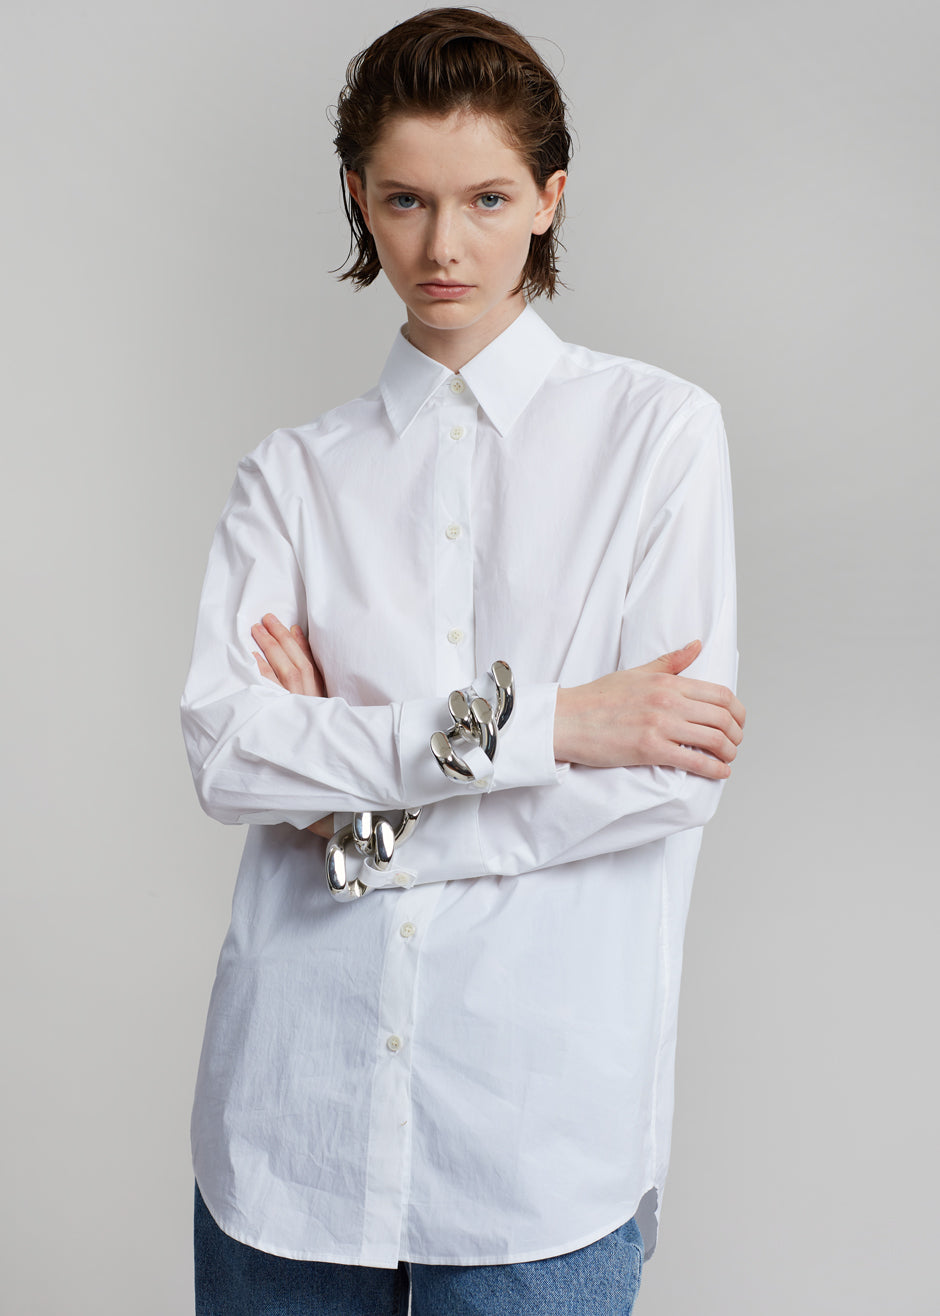 JW Anderson Silver Chain Link Shirt - White – The Frankie Shop